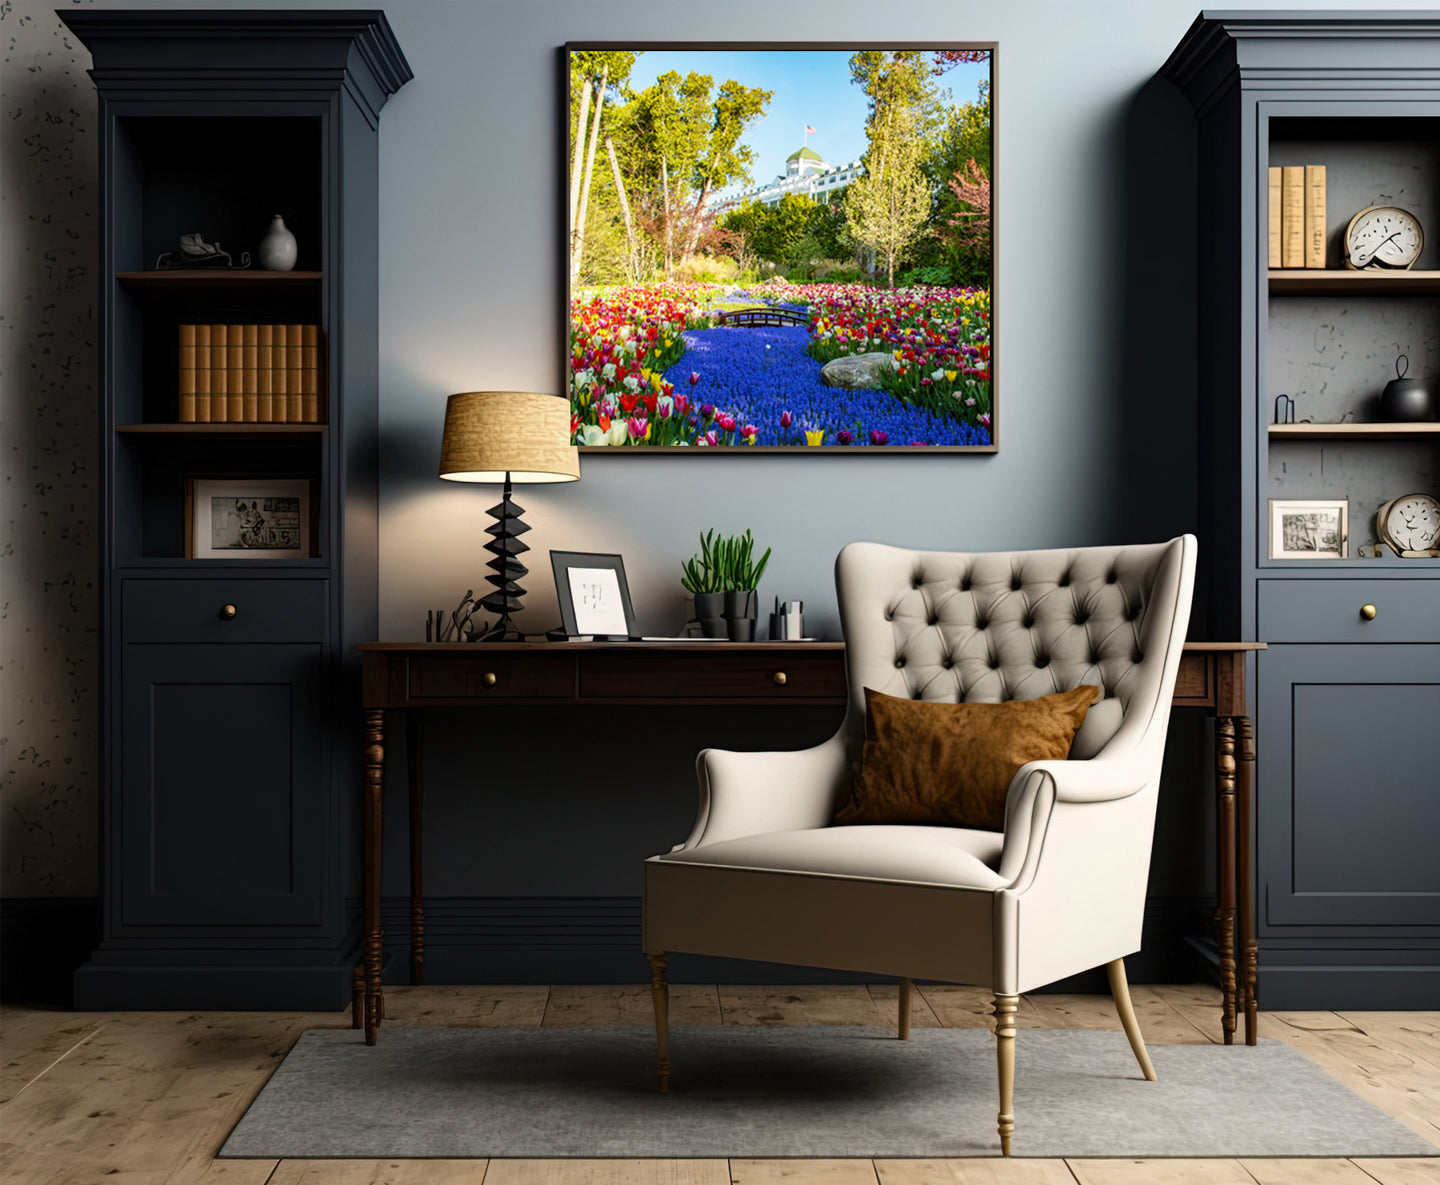 Decorate your home with Mackinac Island wall art.  This Mackinac Island photograph by Jennifer Wohletz features a river of grape hyacinths and brightly colored tulips is a cheerful feast for your senses in Grand Hotel's Secret Garden.